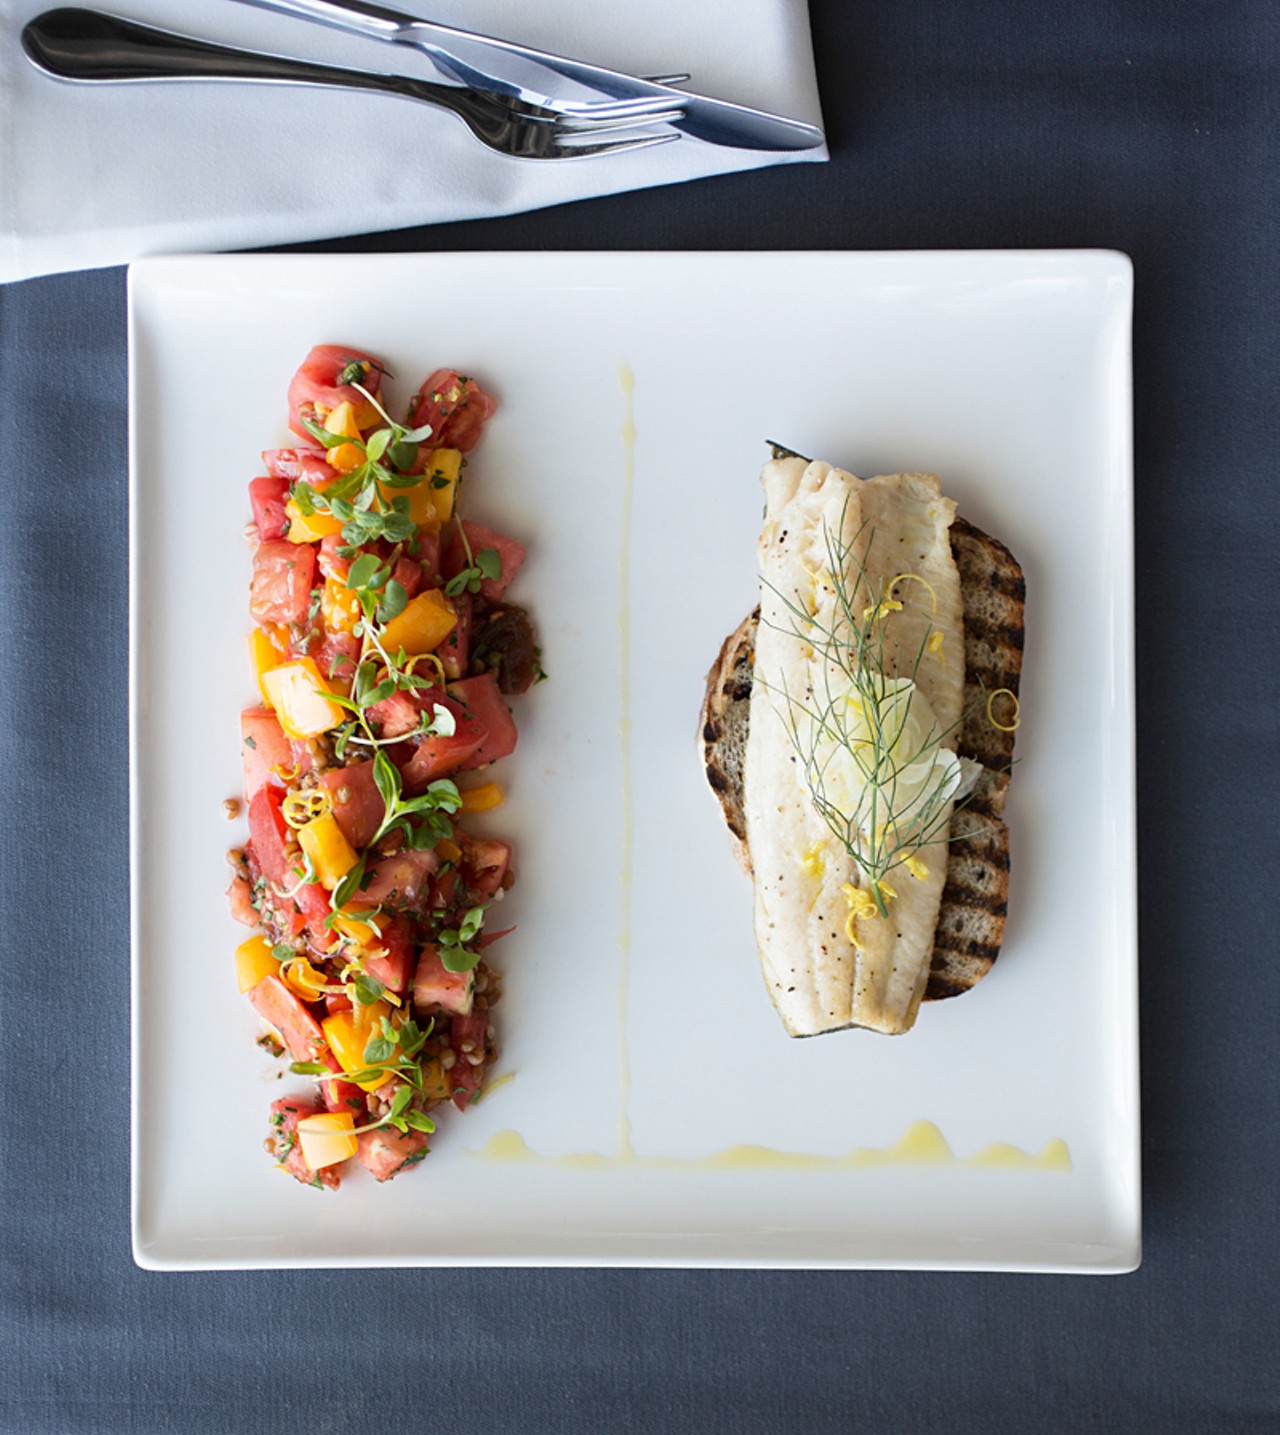 The roasted-trout filet sandwich is made with fresh herbs and summer tomato between Companion olive bread. Served with a wheat-berry salad and red-wine vinaigrette.